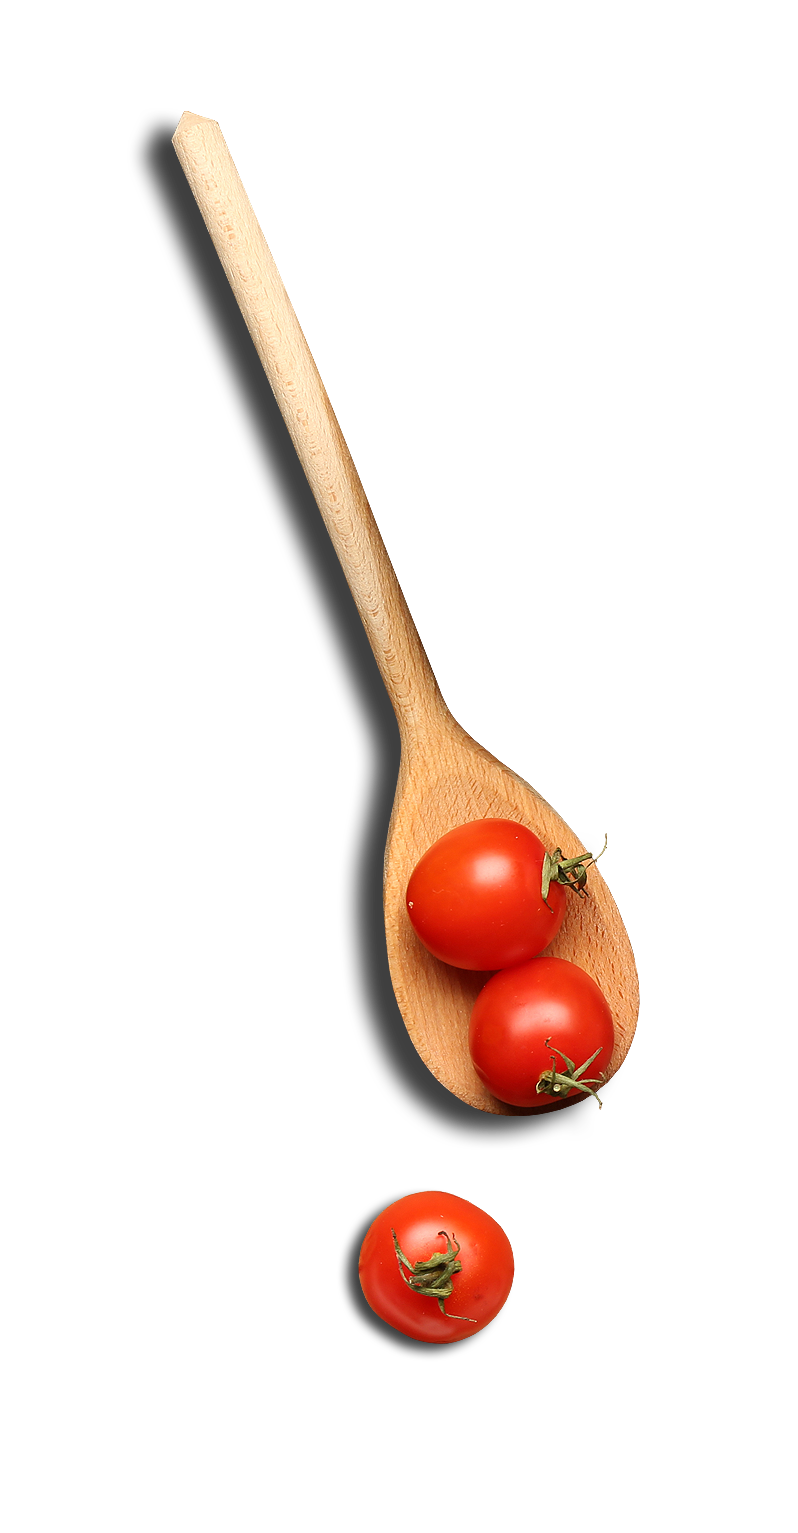 And Google Wooden Cherry Spoon Images Tomatoes PNG Image